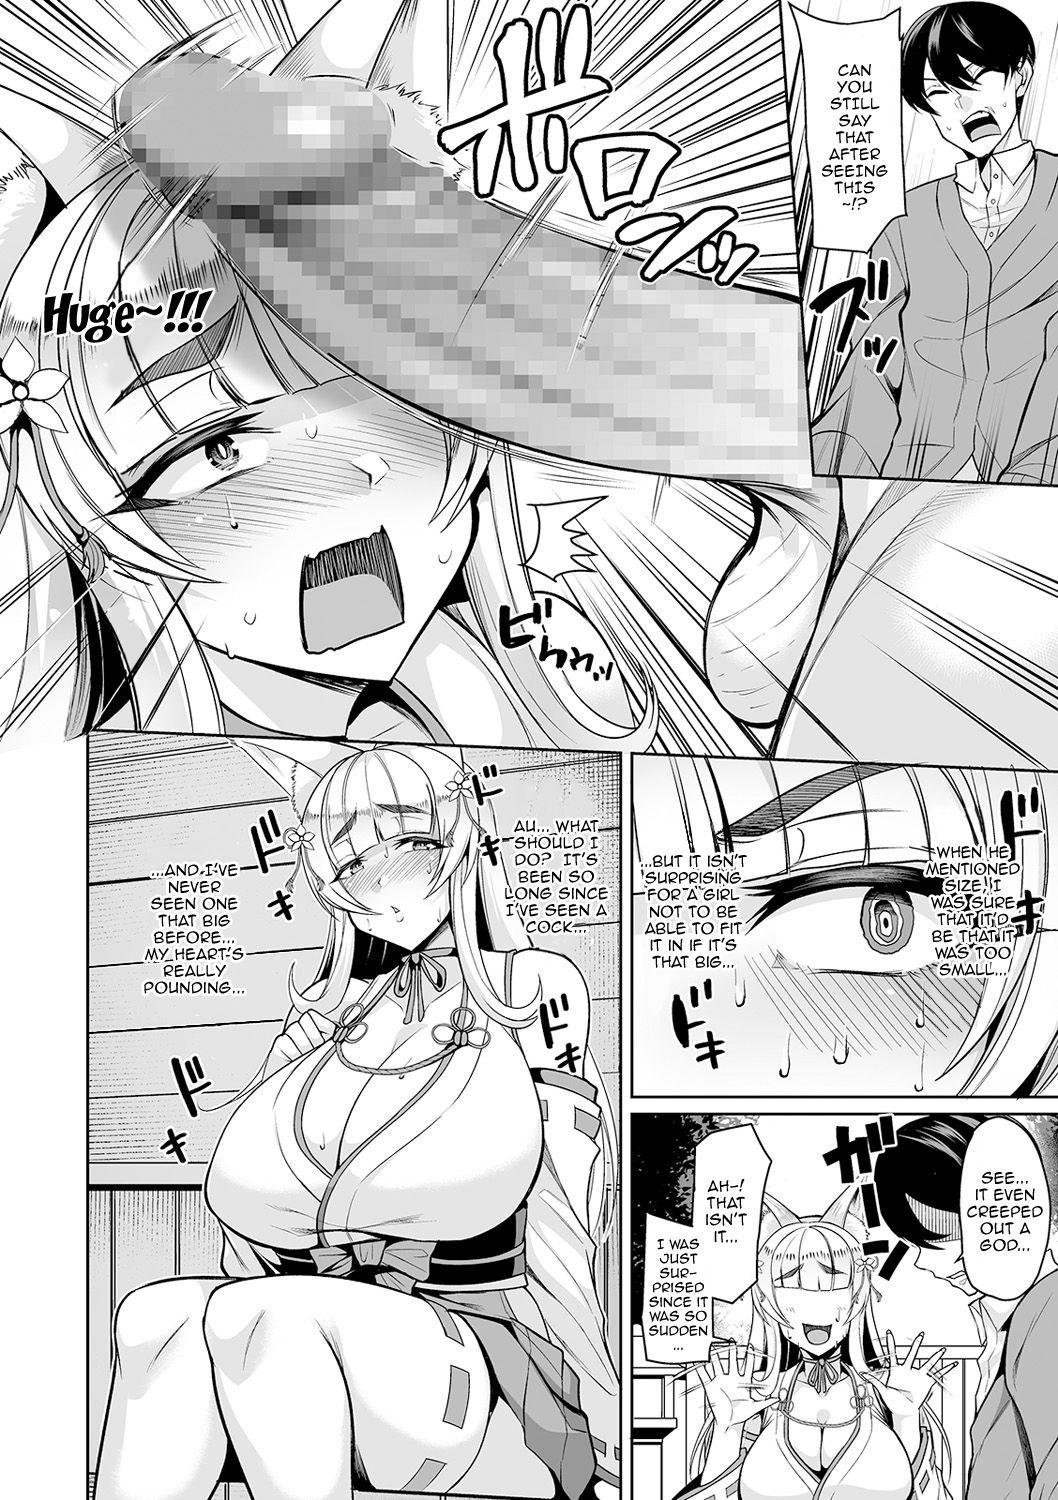 Porno 18 Cos Miko Zuma to Yami Otoko | The Cosplaying Shrine Maiden And The Suffering Man Gaysex - Page 4